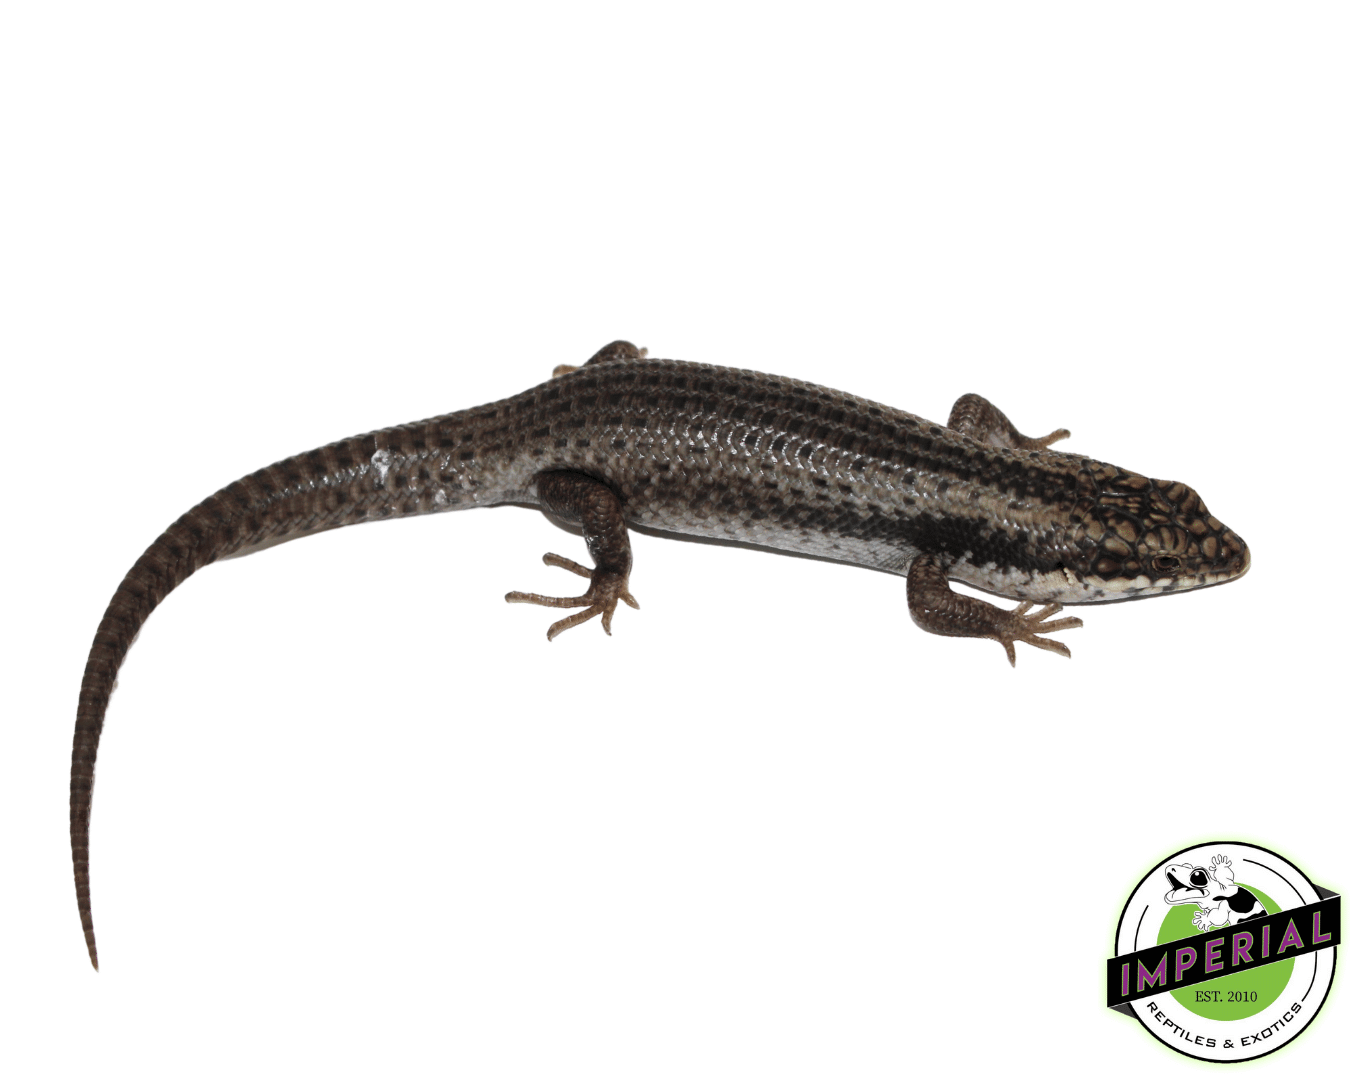 skink for sale, buy reptiles online